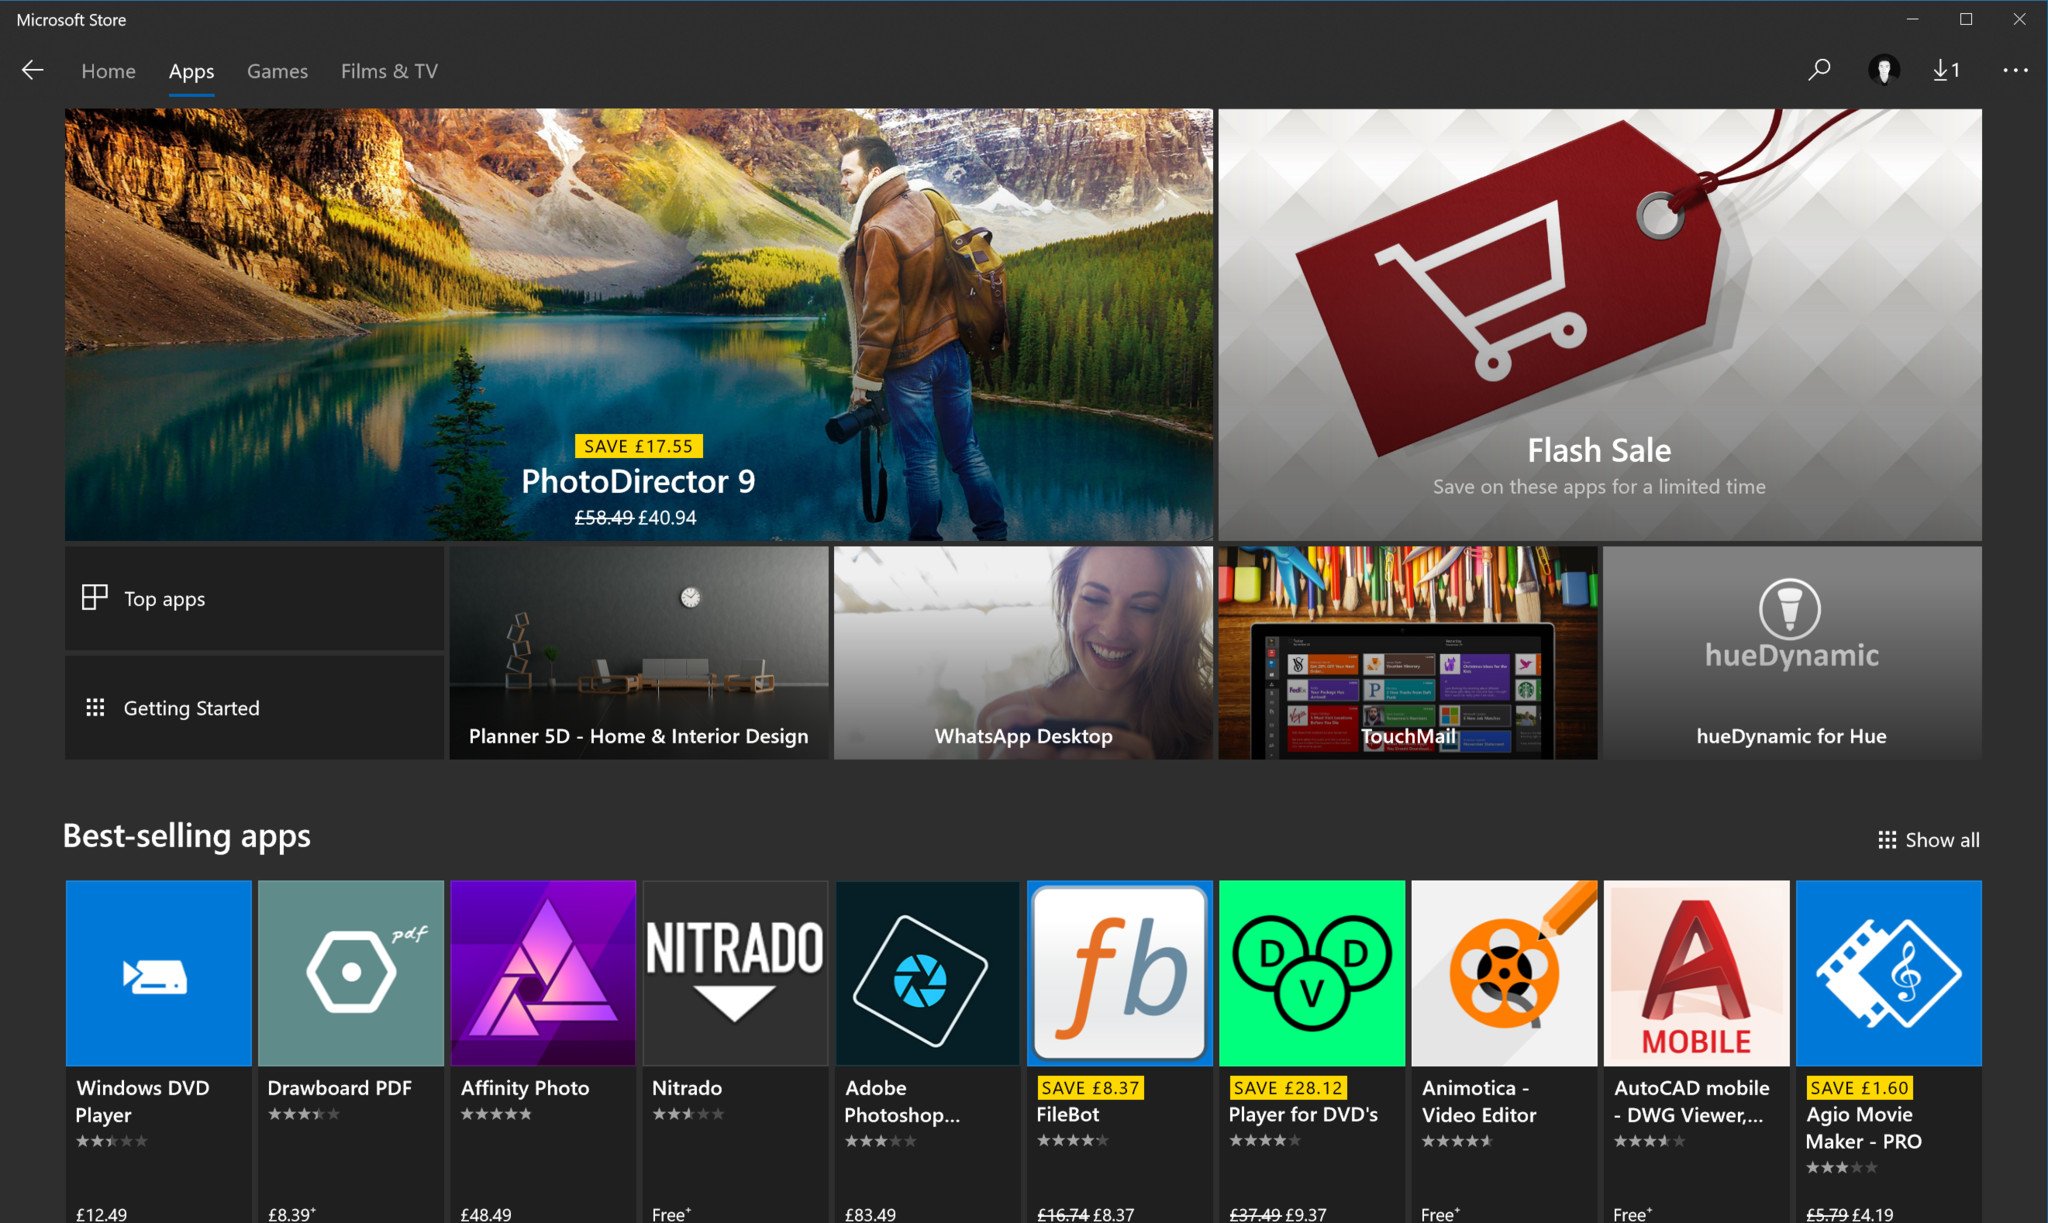 Best selling apps - Microsoft Store